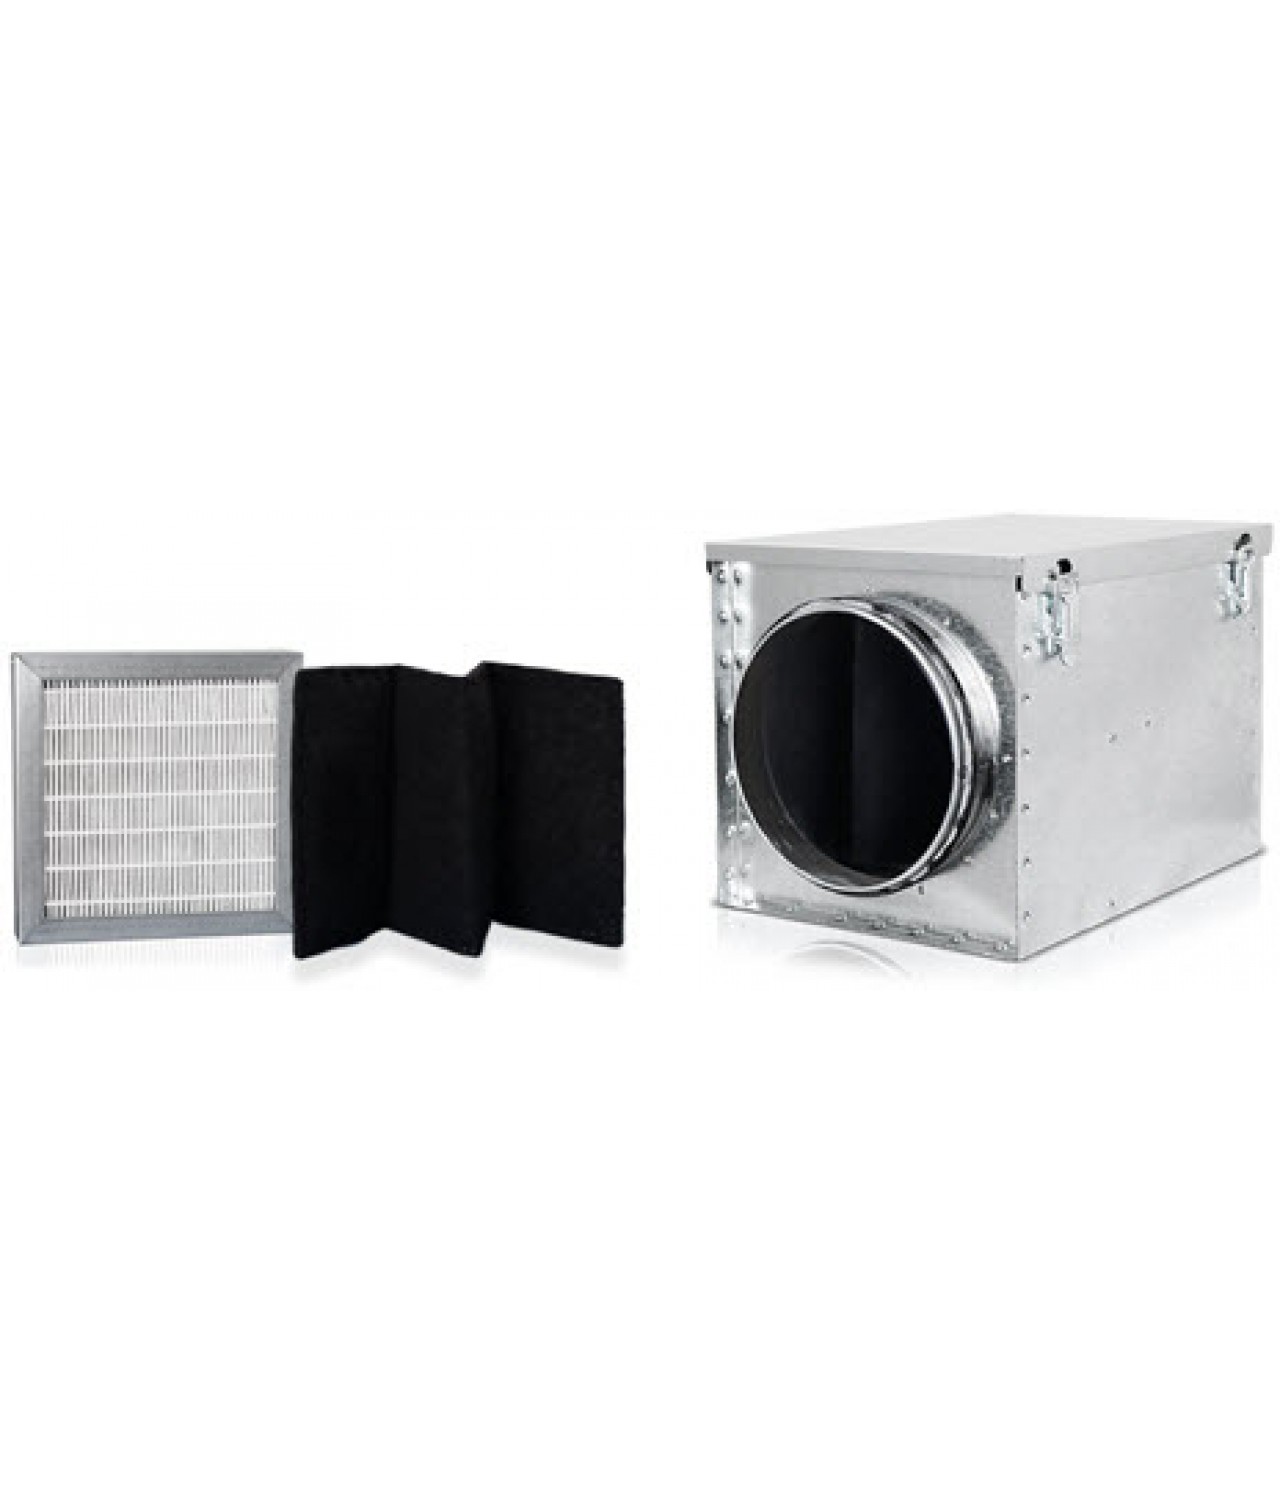 Activated carbon and smog filter set OFDA